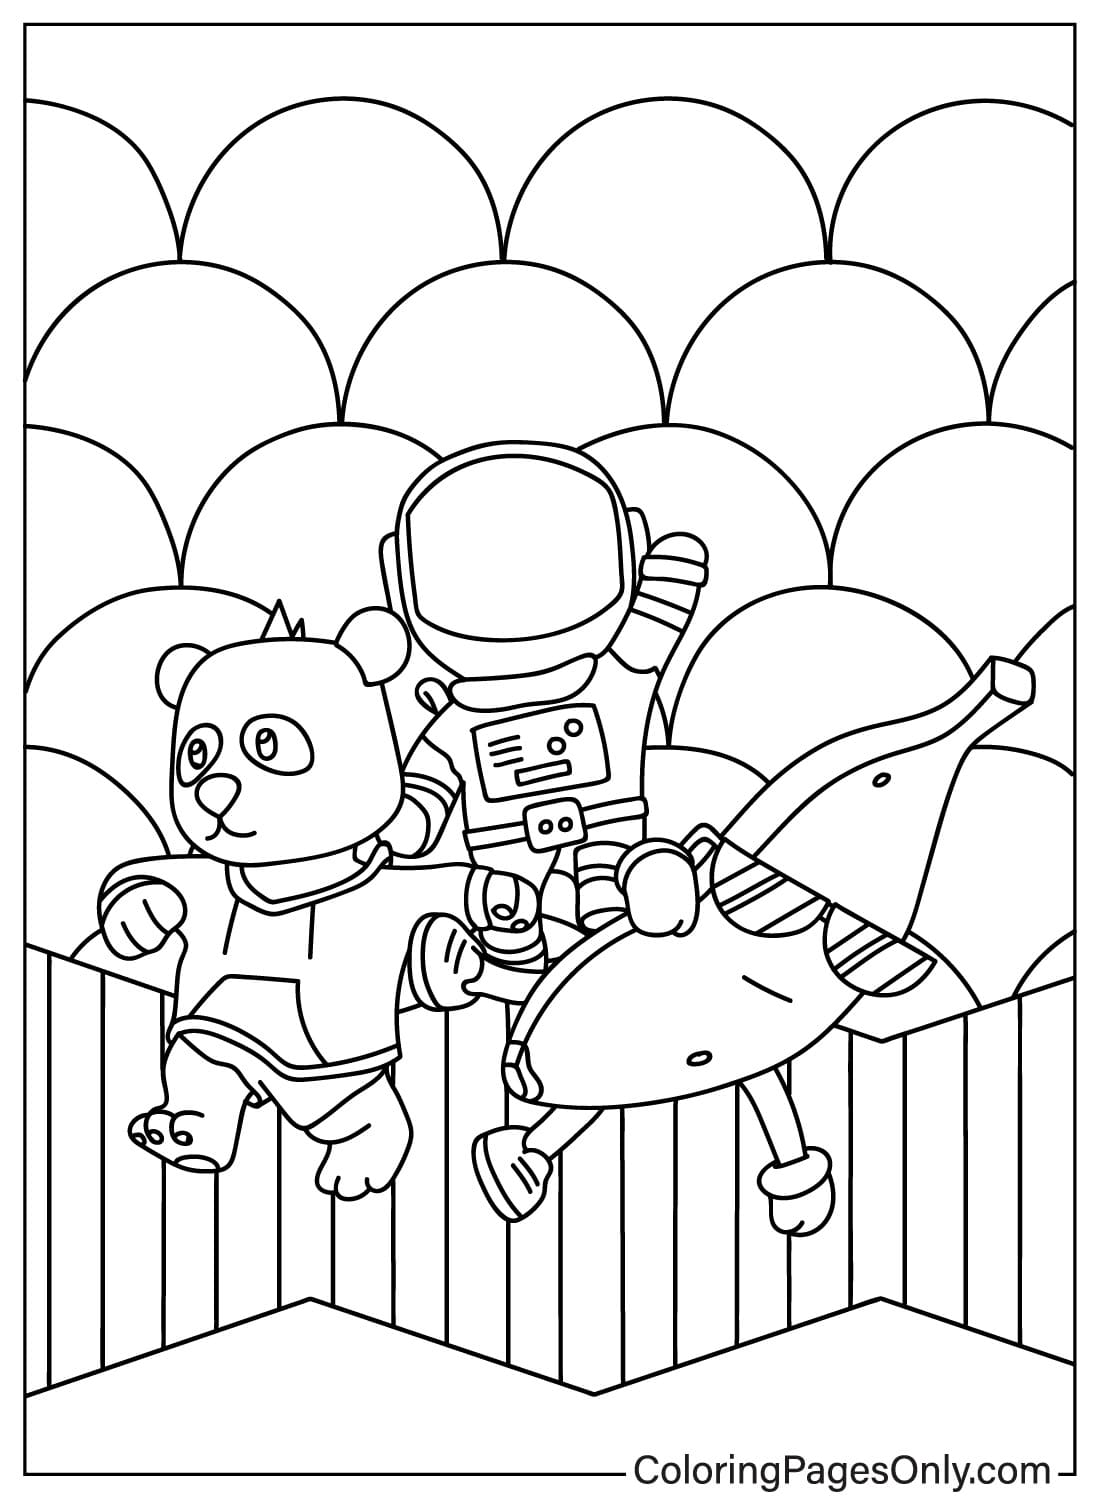 Stumble Guys Coloring Page Free from Stumble Guys